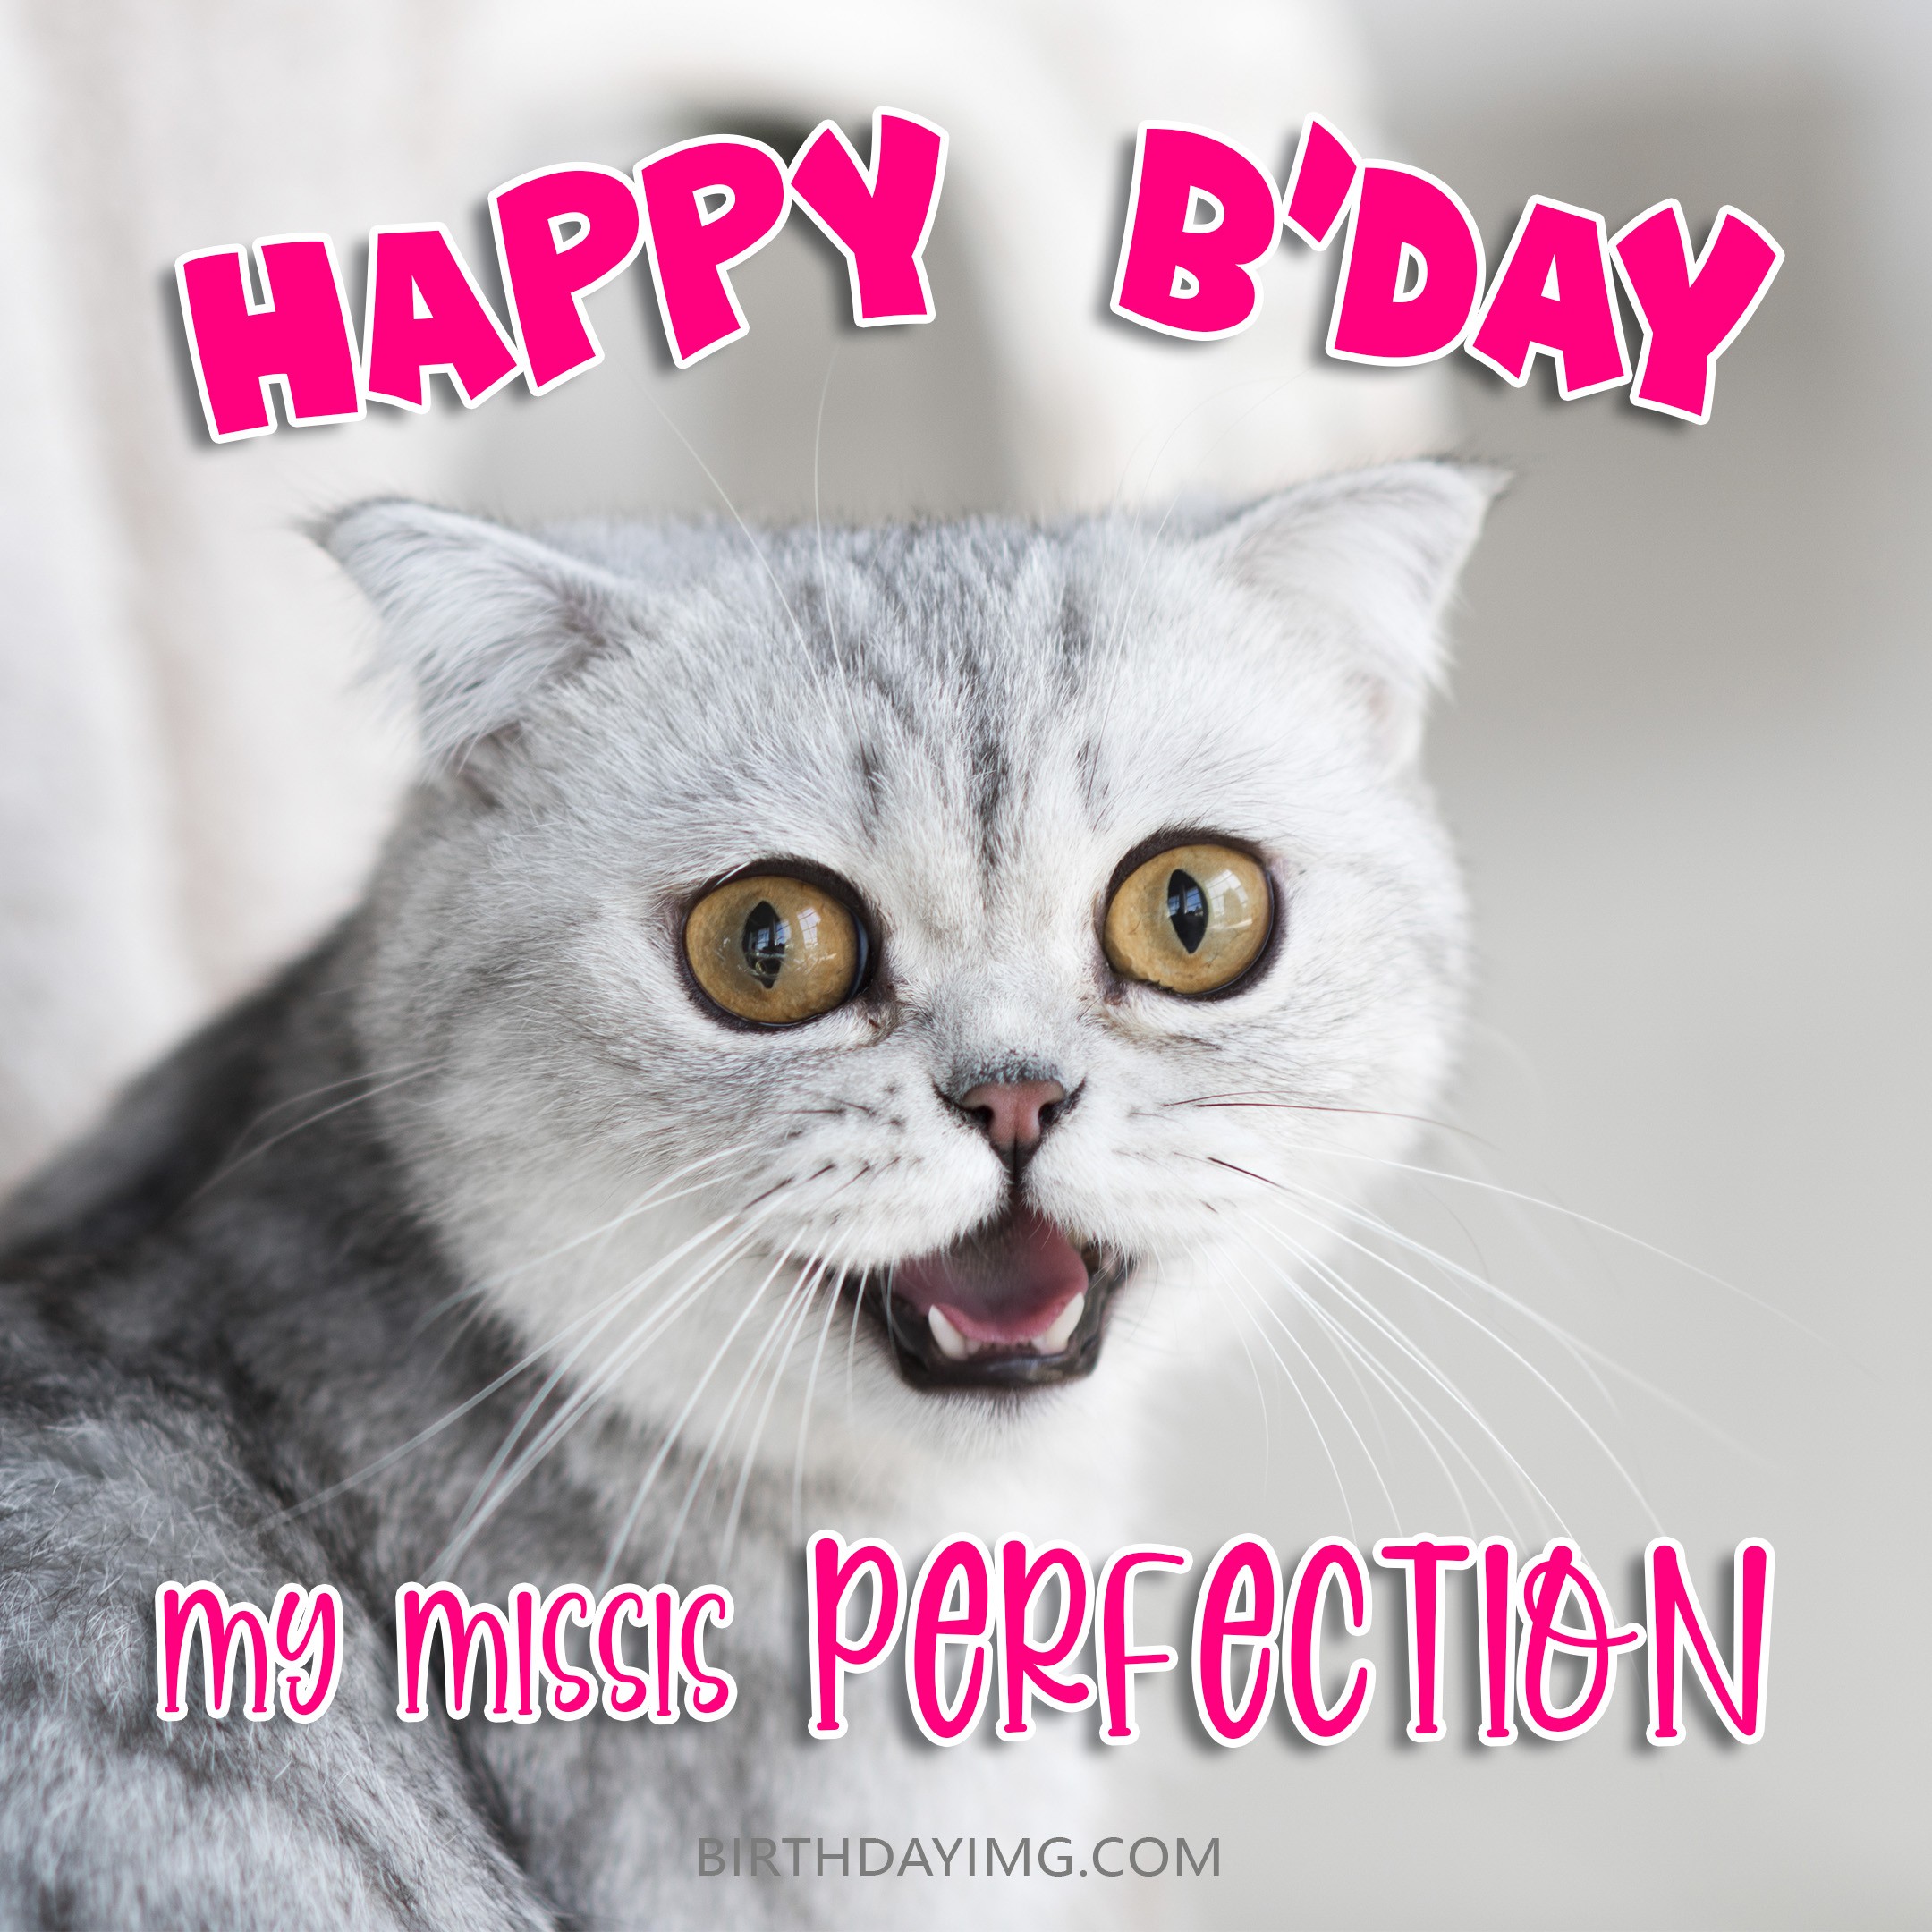 Free Funny Happy Birthday Image For Wife With Cute Cat - birthdayimg.com